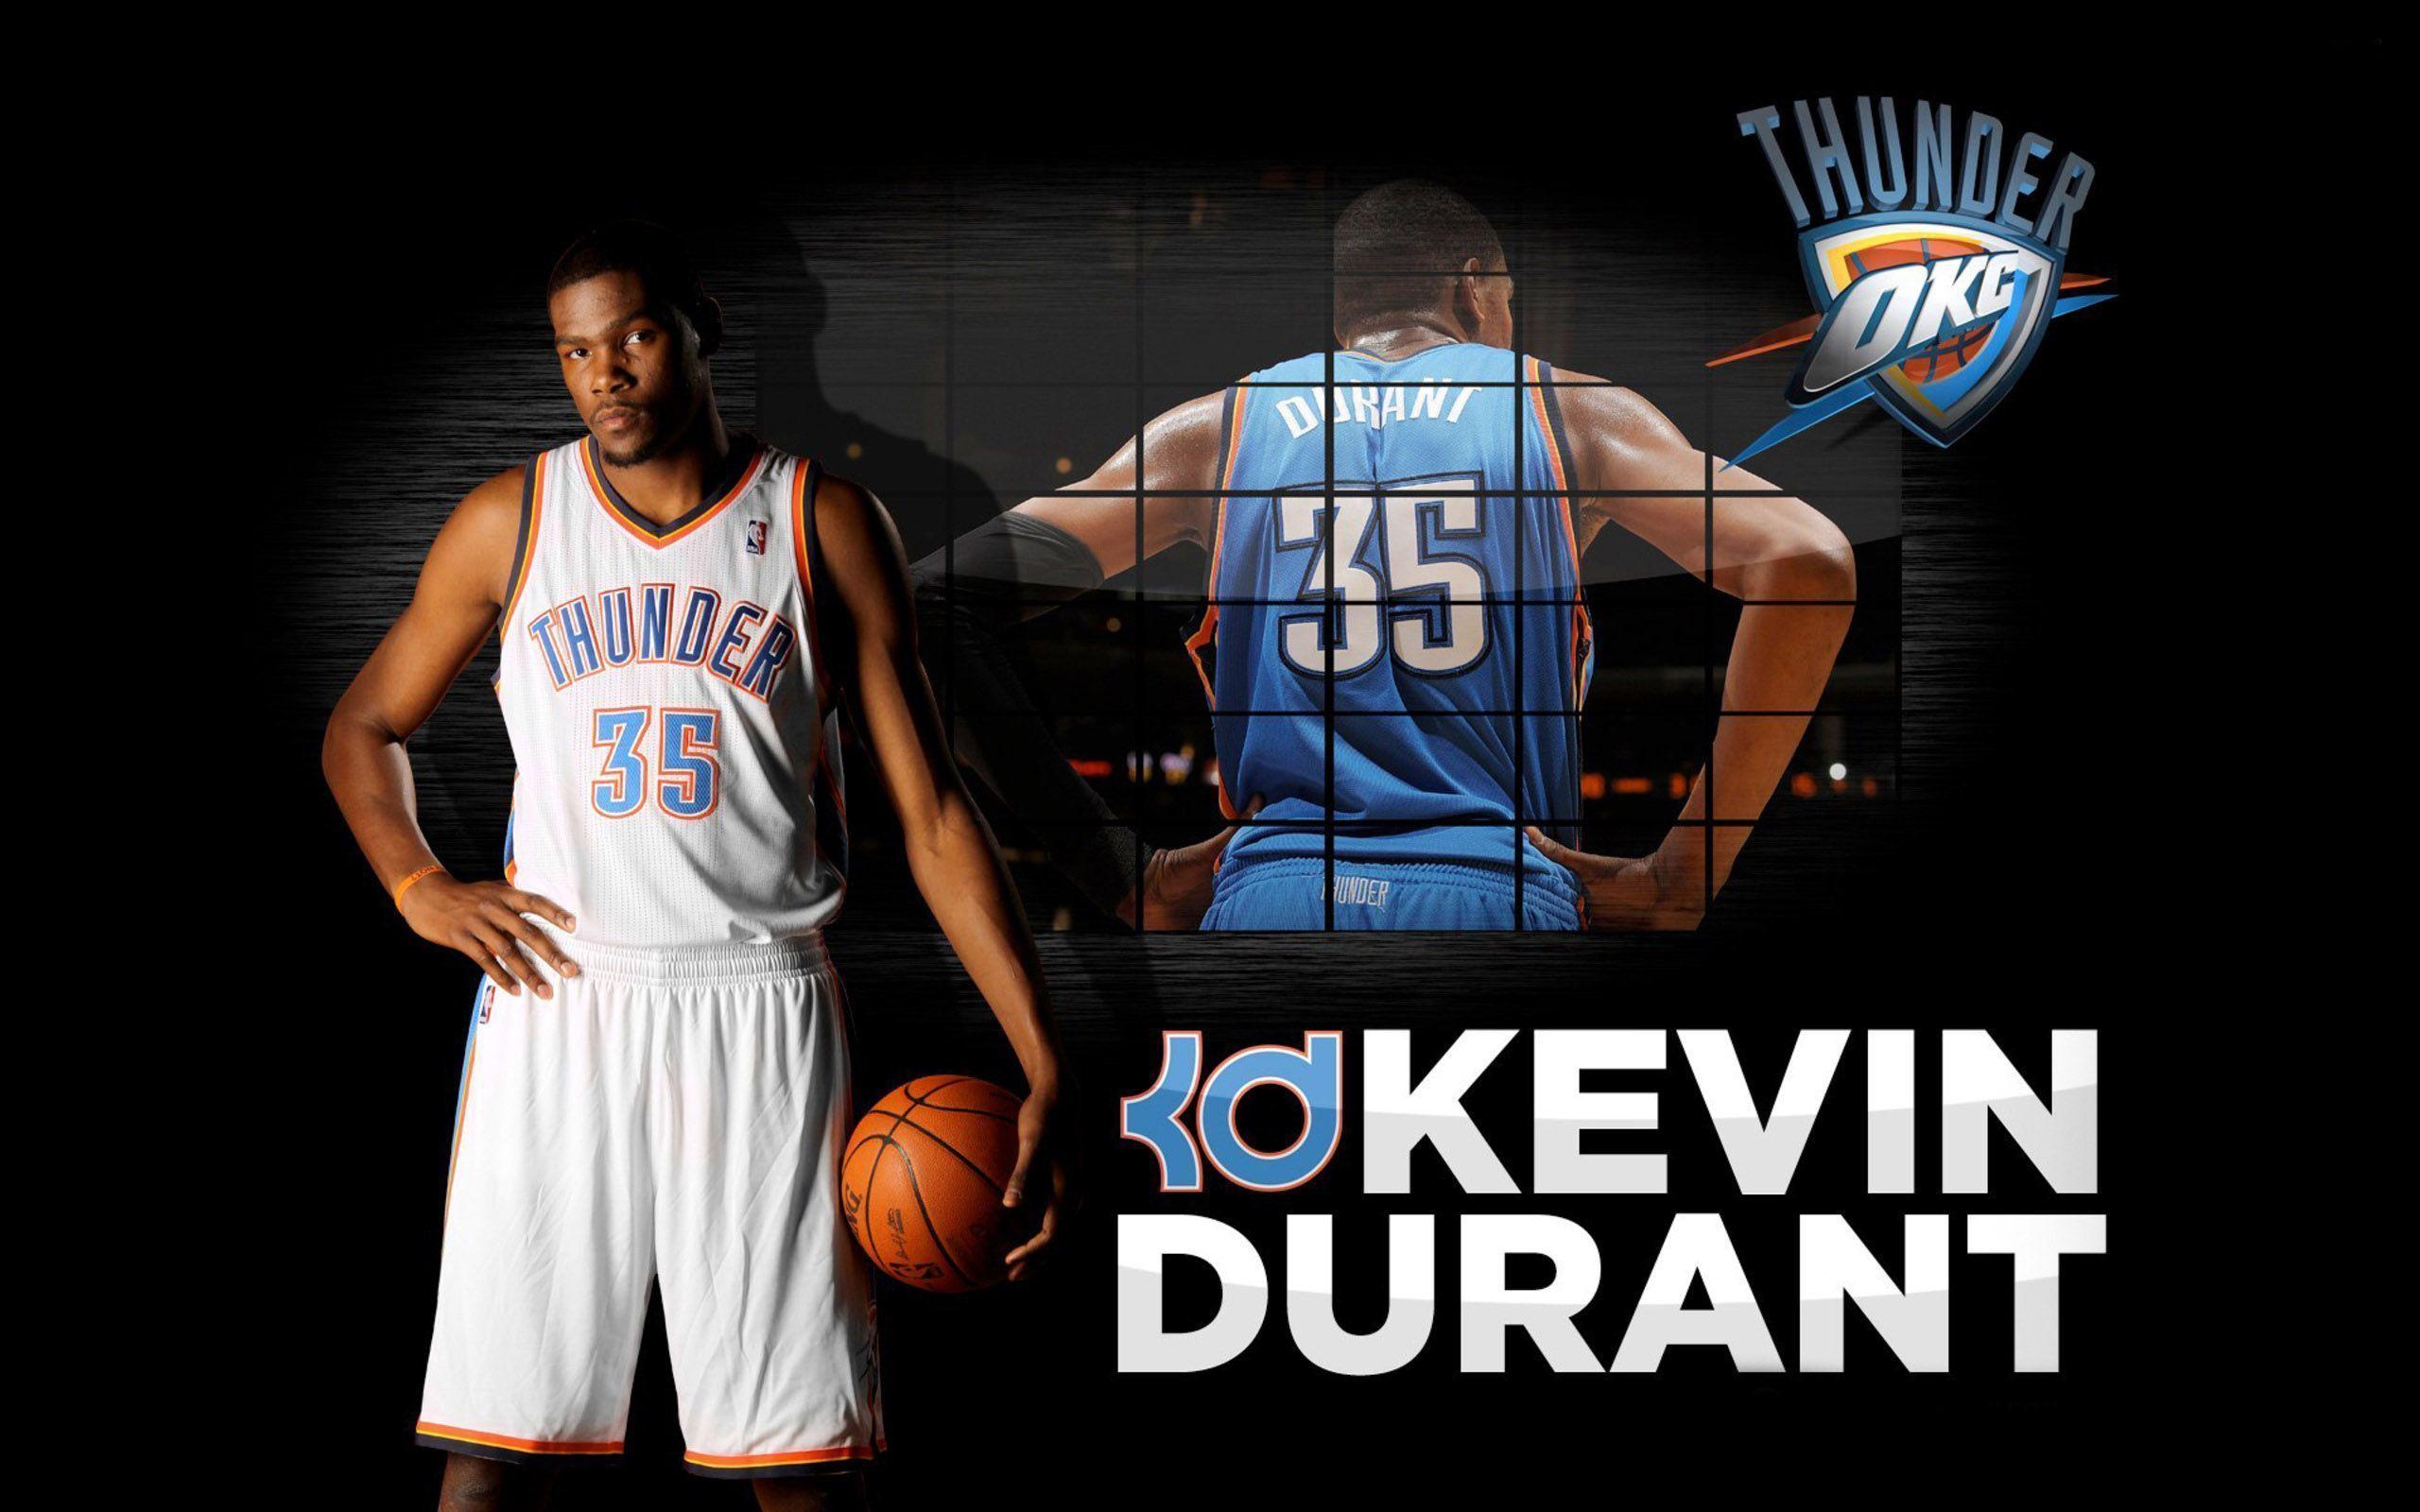 Kevin Durant OKC Thunder 2014 Wallpaper Wide or HD. Male